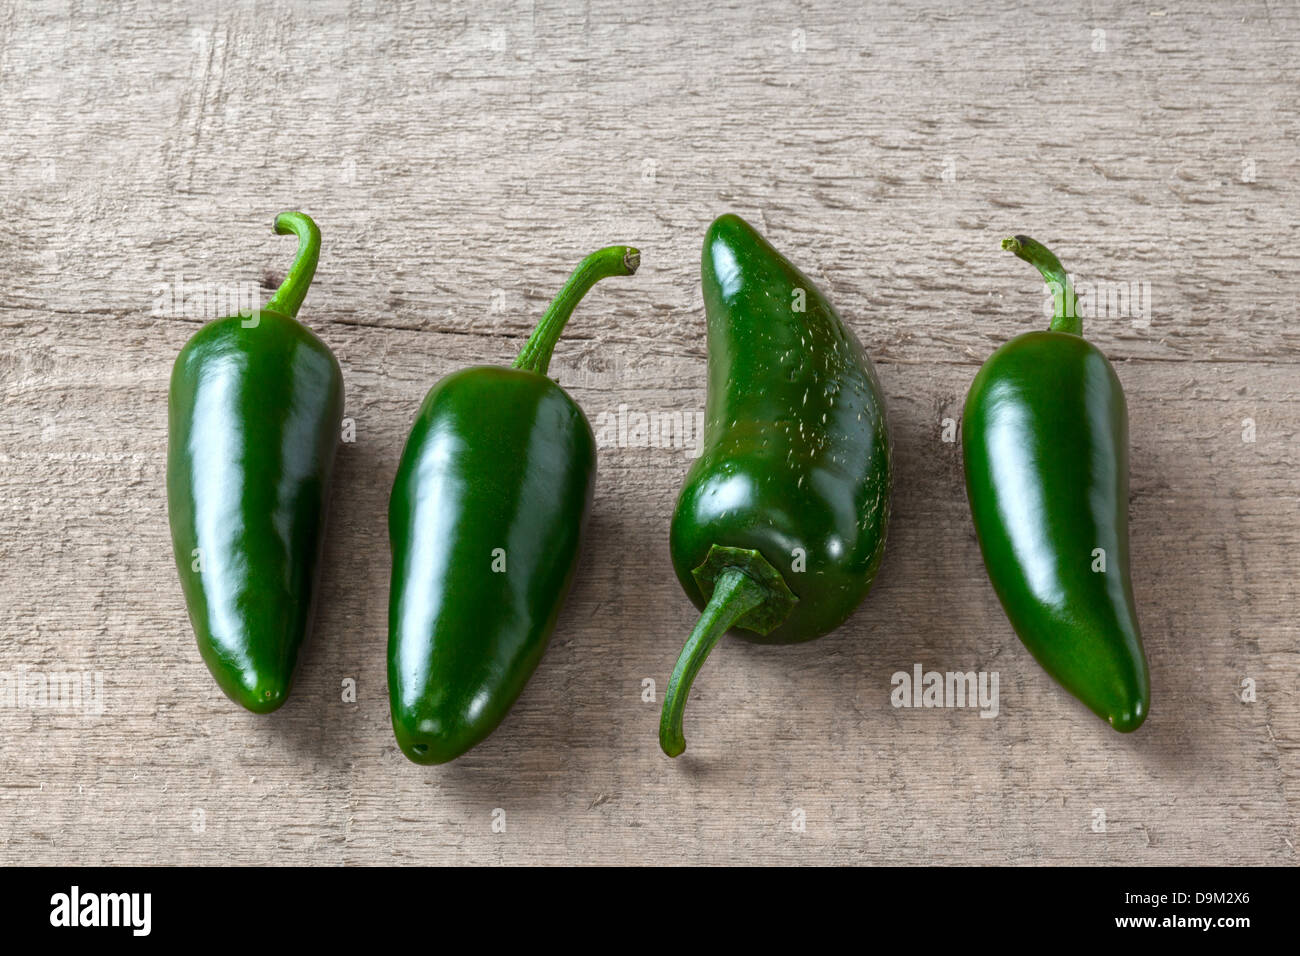 Green Jalapeno Chillies - four jalapeno chillies on a plank or rustic background. Stock Photo